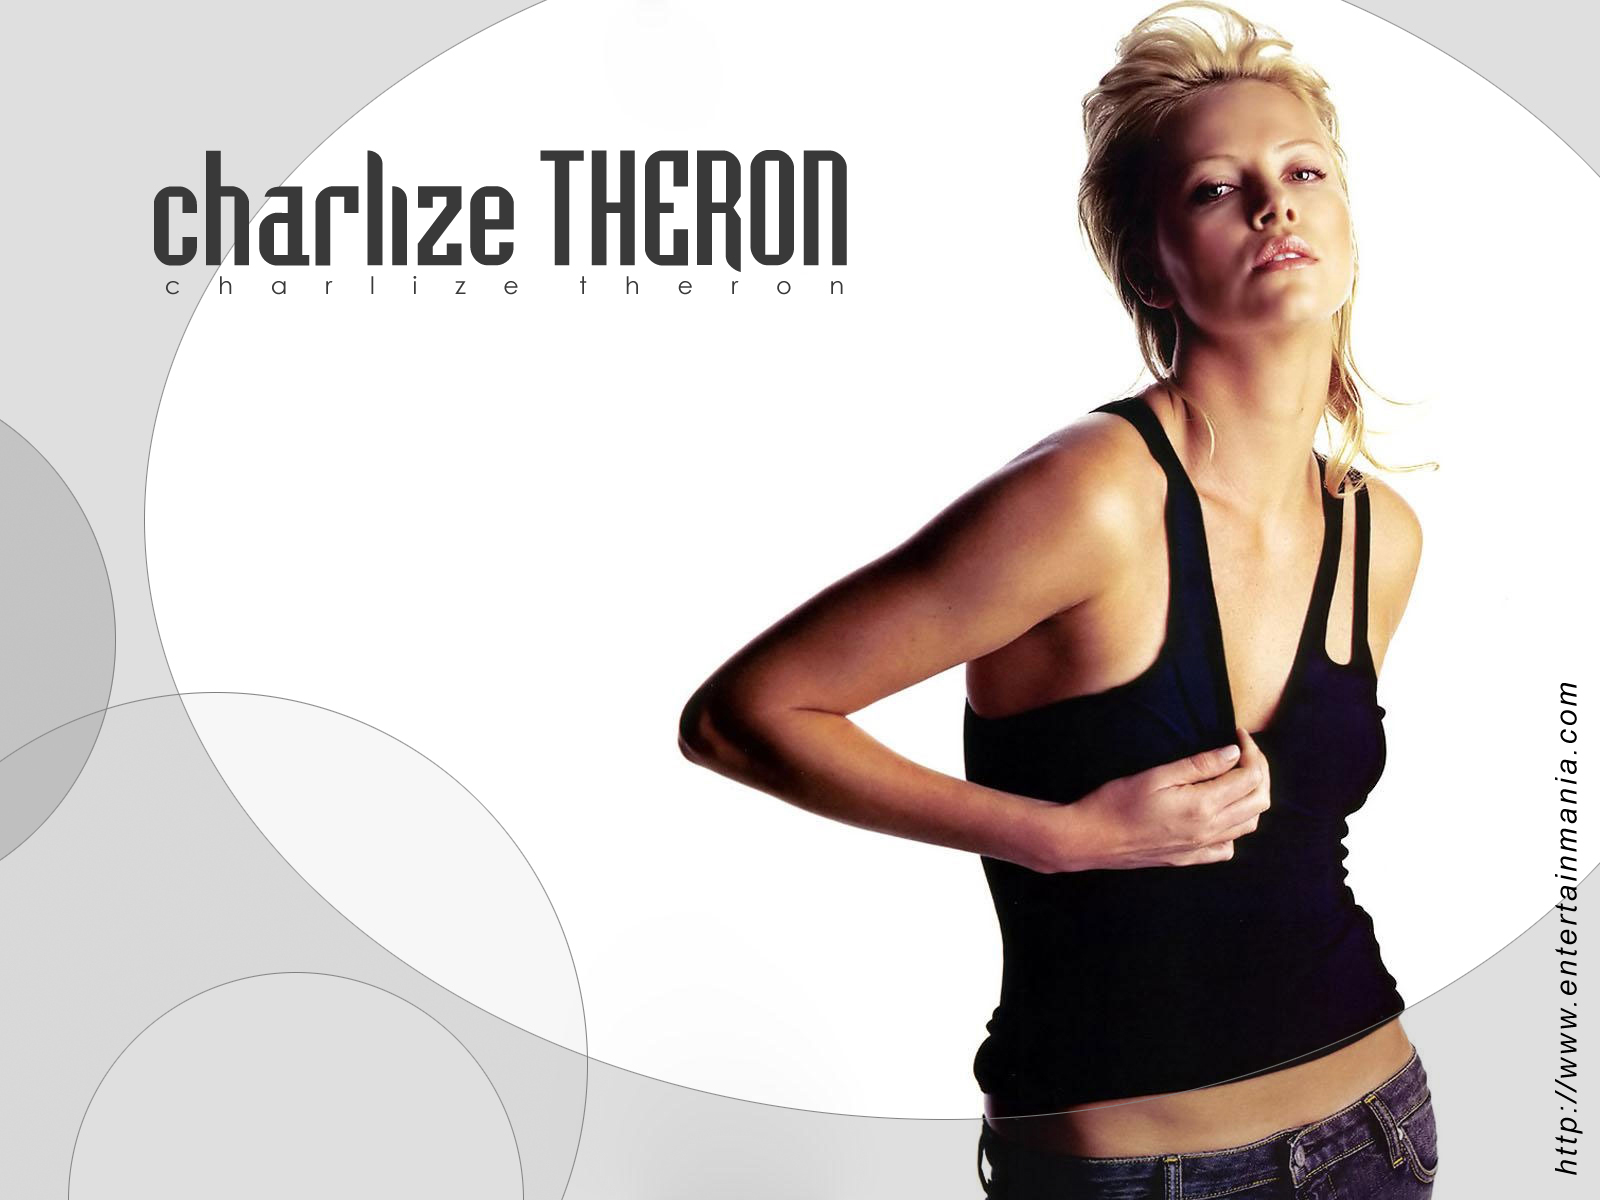 Download High quality Charlize Theron wallpaper / Celebrities Female / 1600x1200